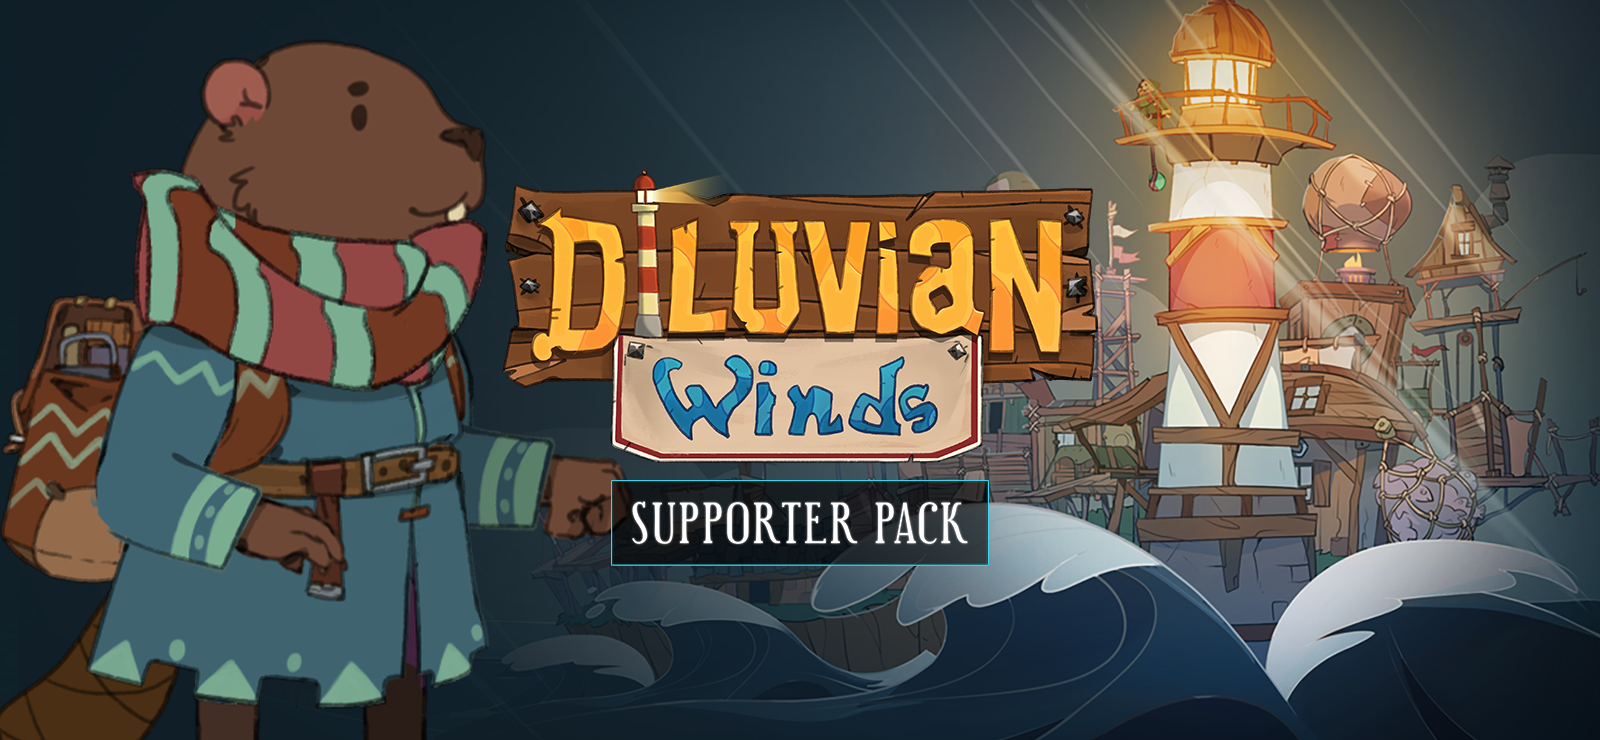 Diluvian Winds - Supporter Pack